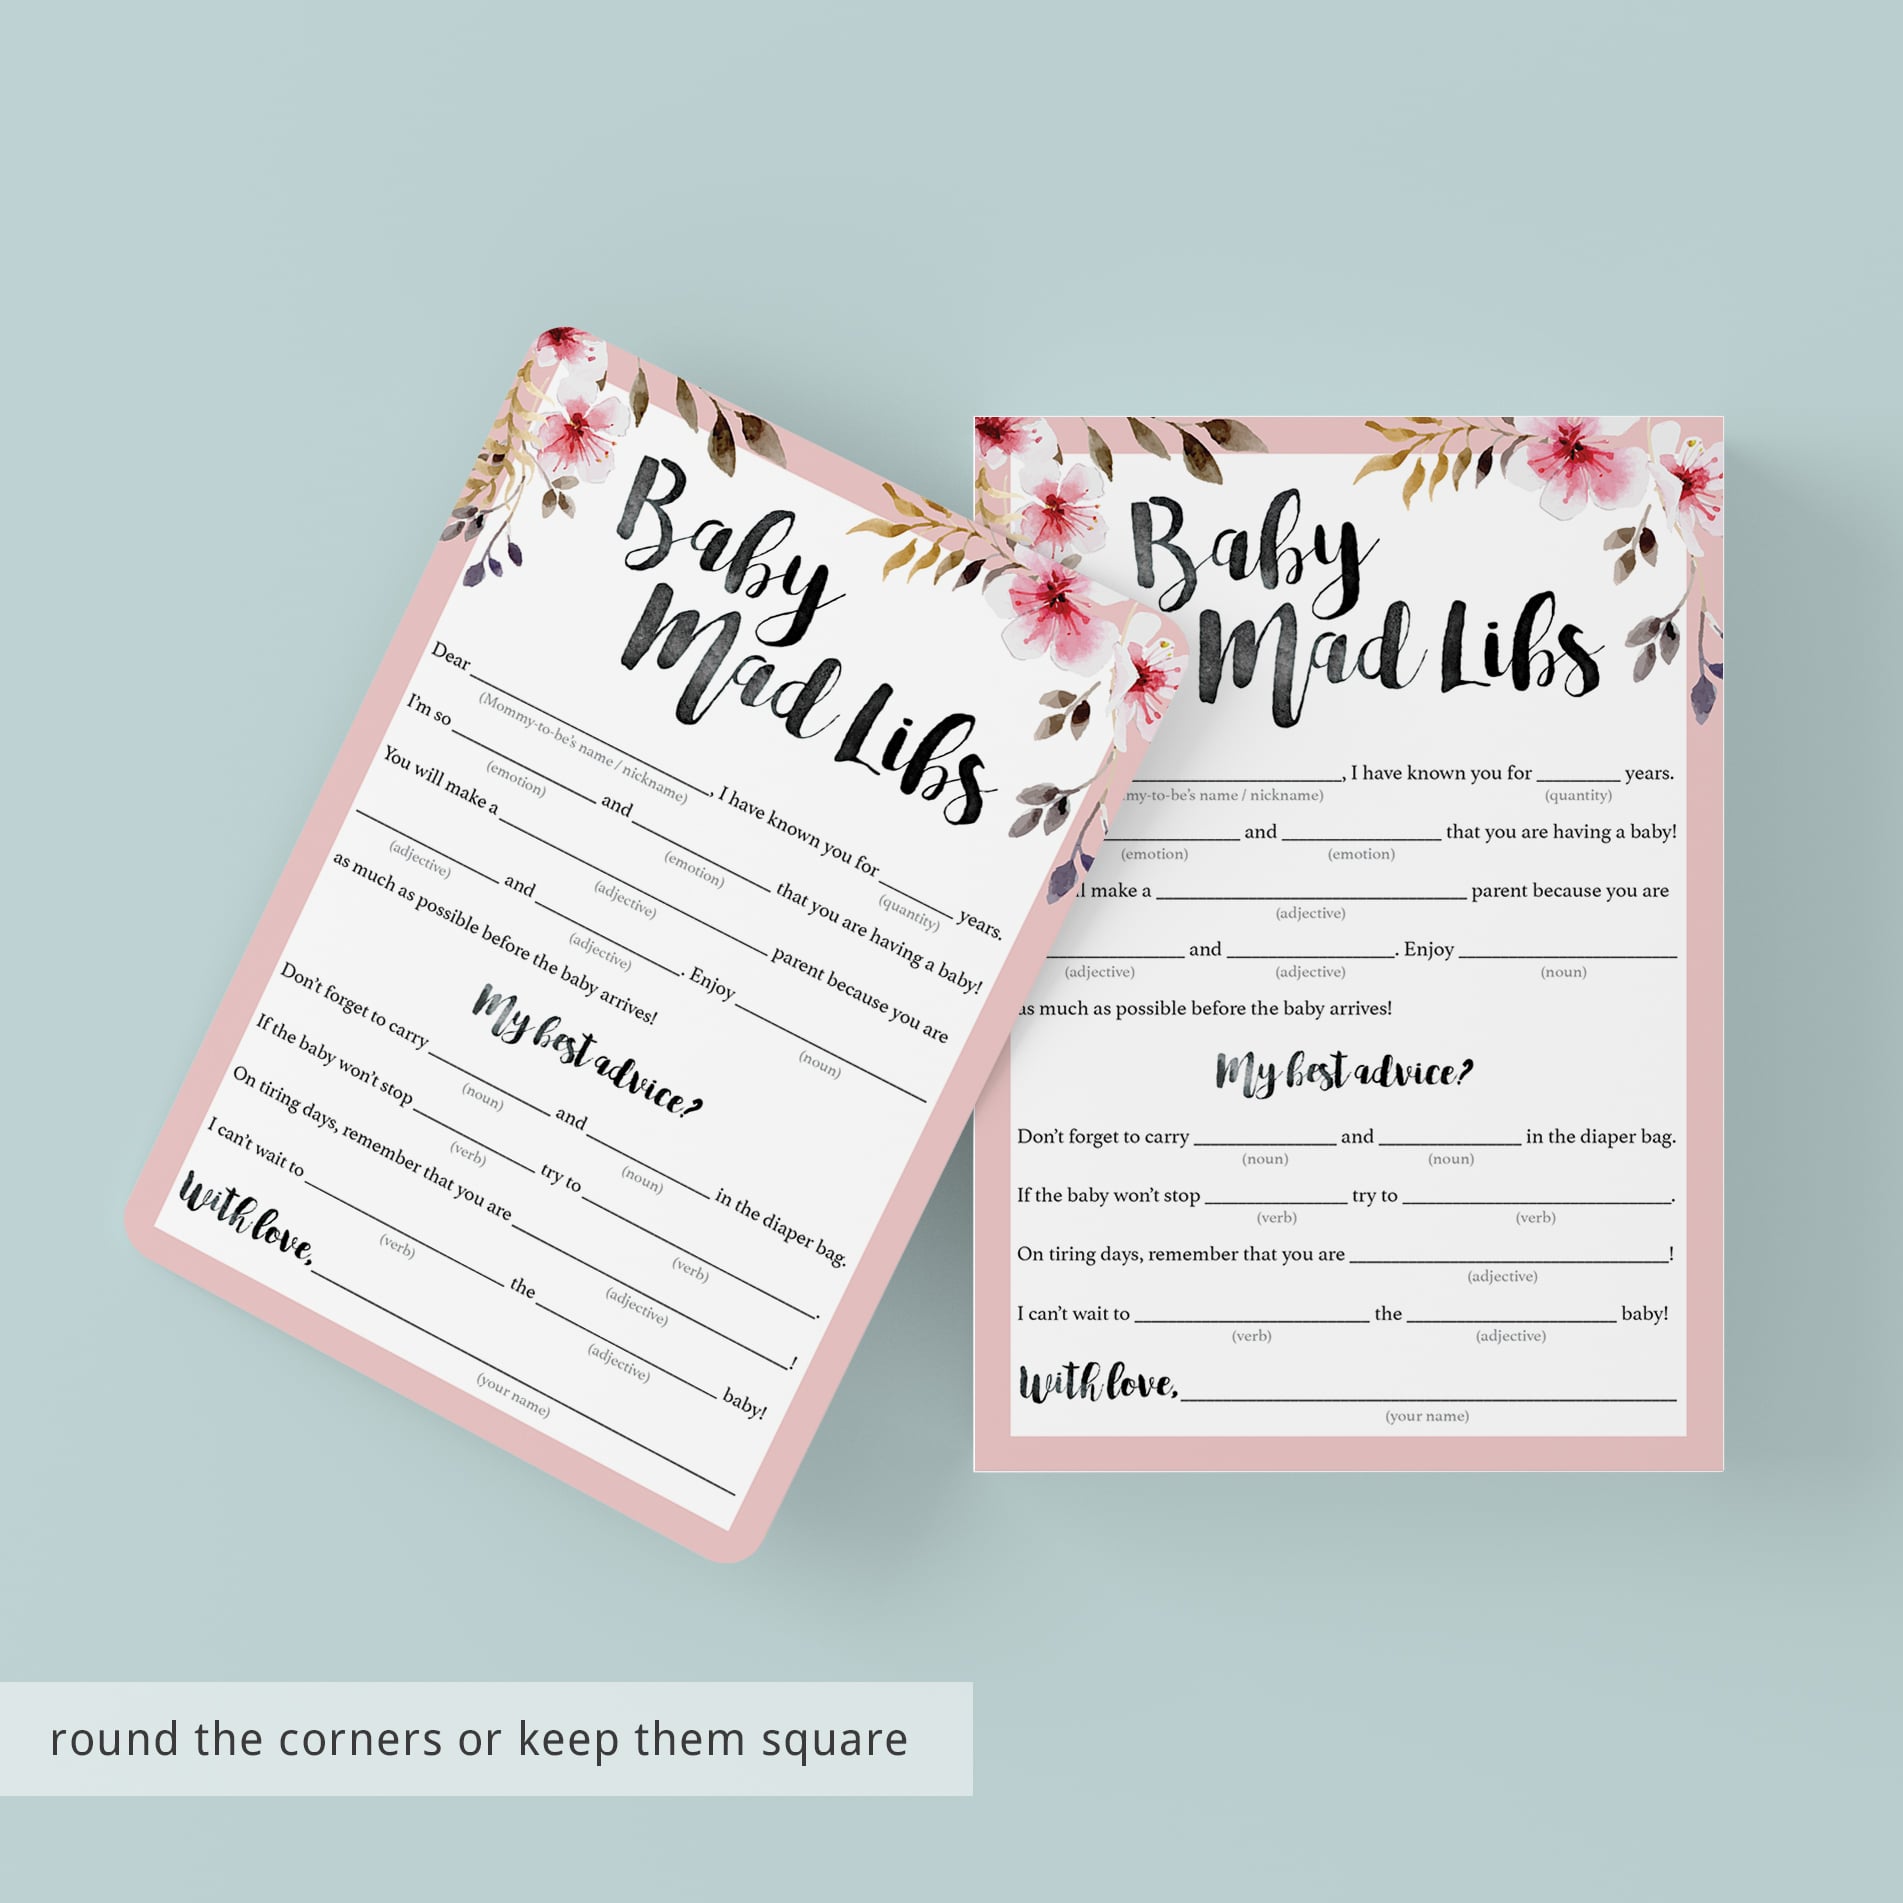 Blush baby shower game baby mad libs advice card by LittleSizzle